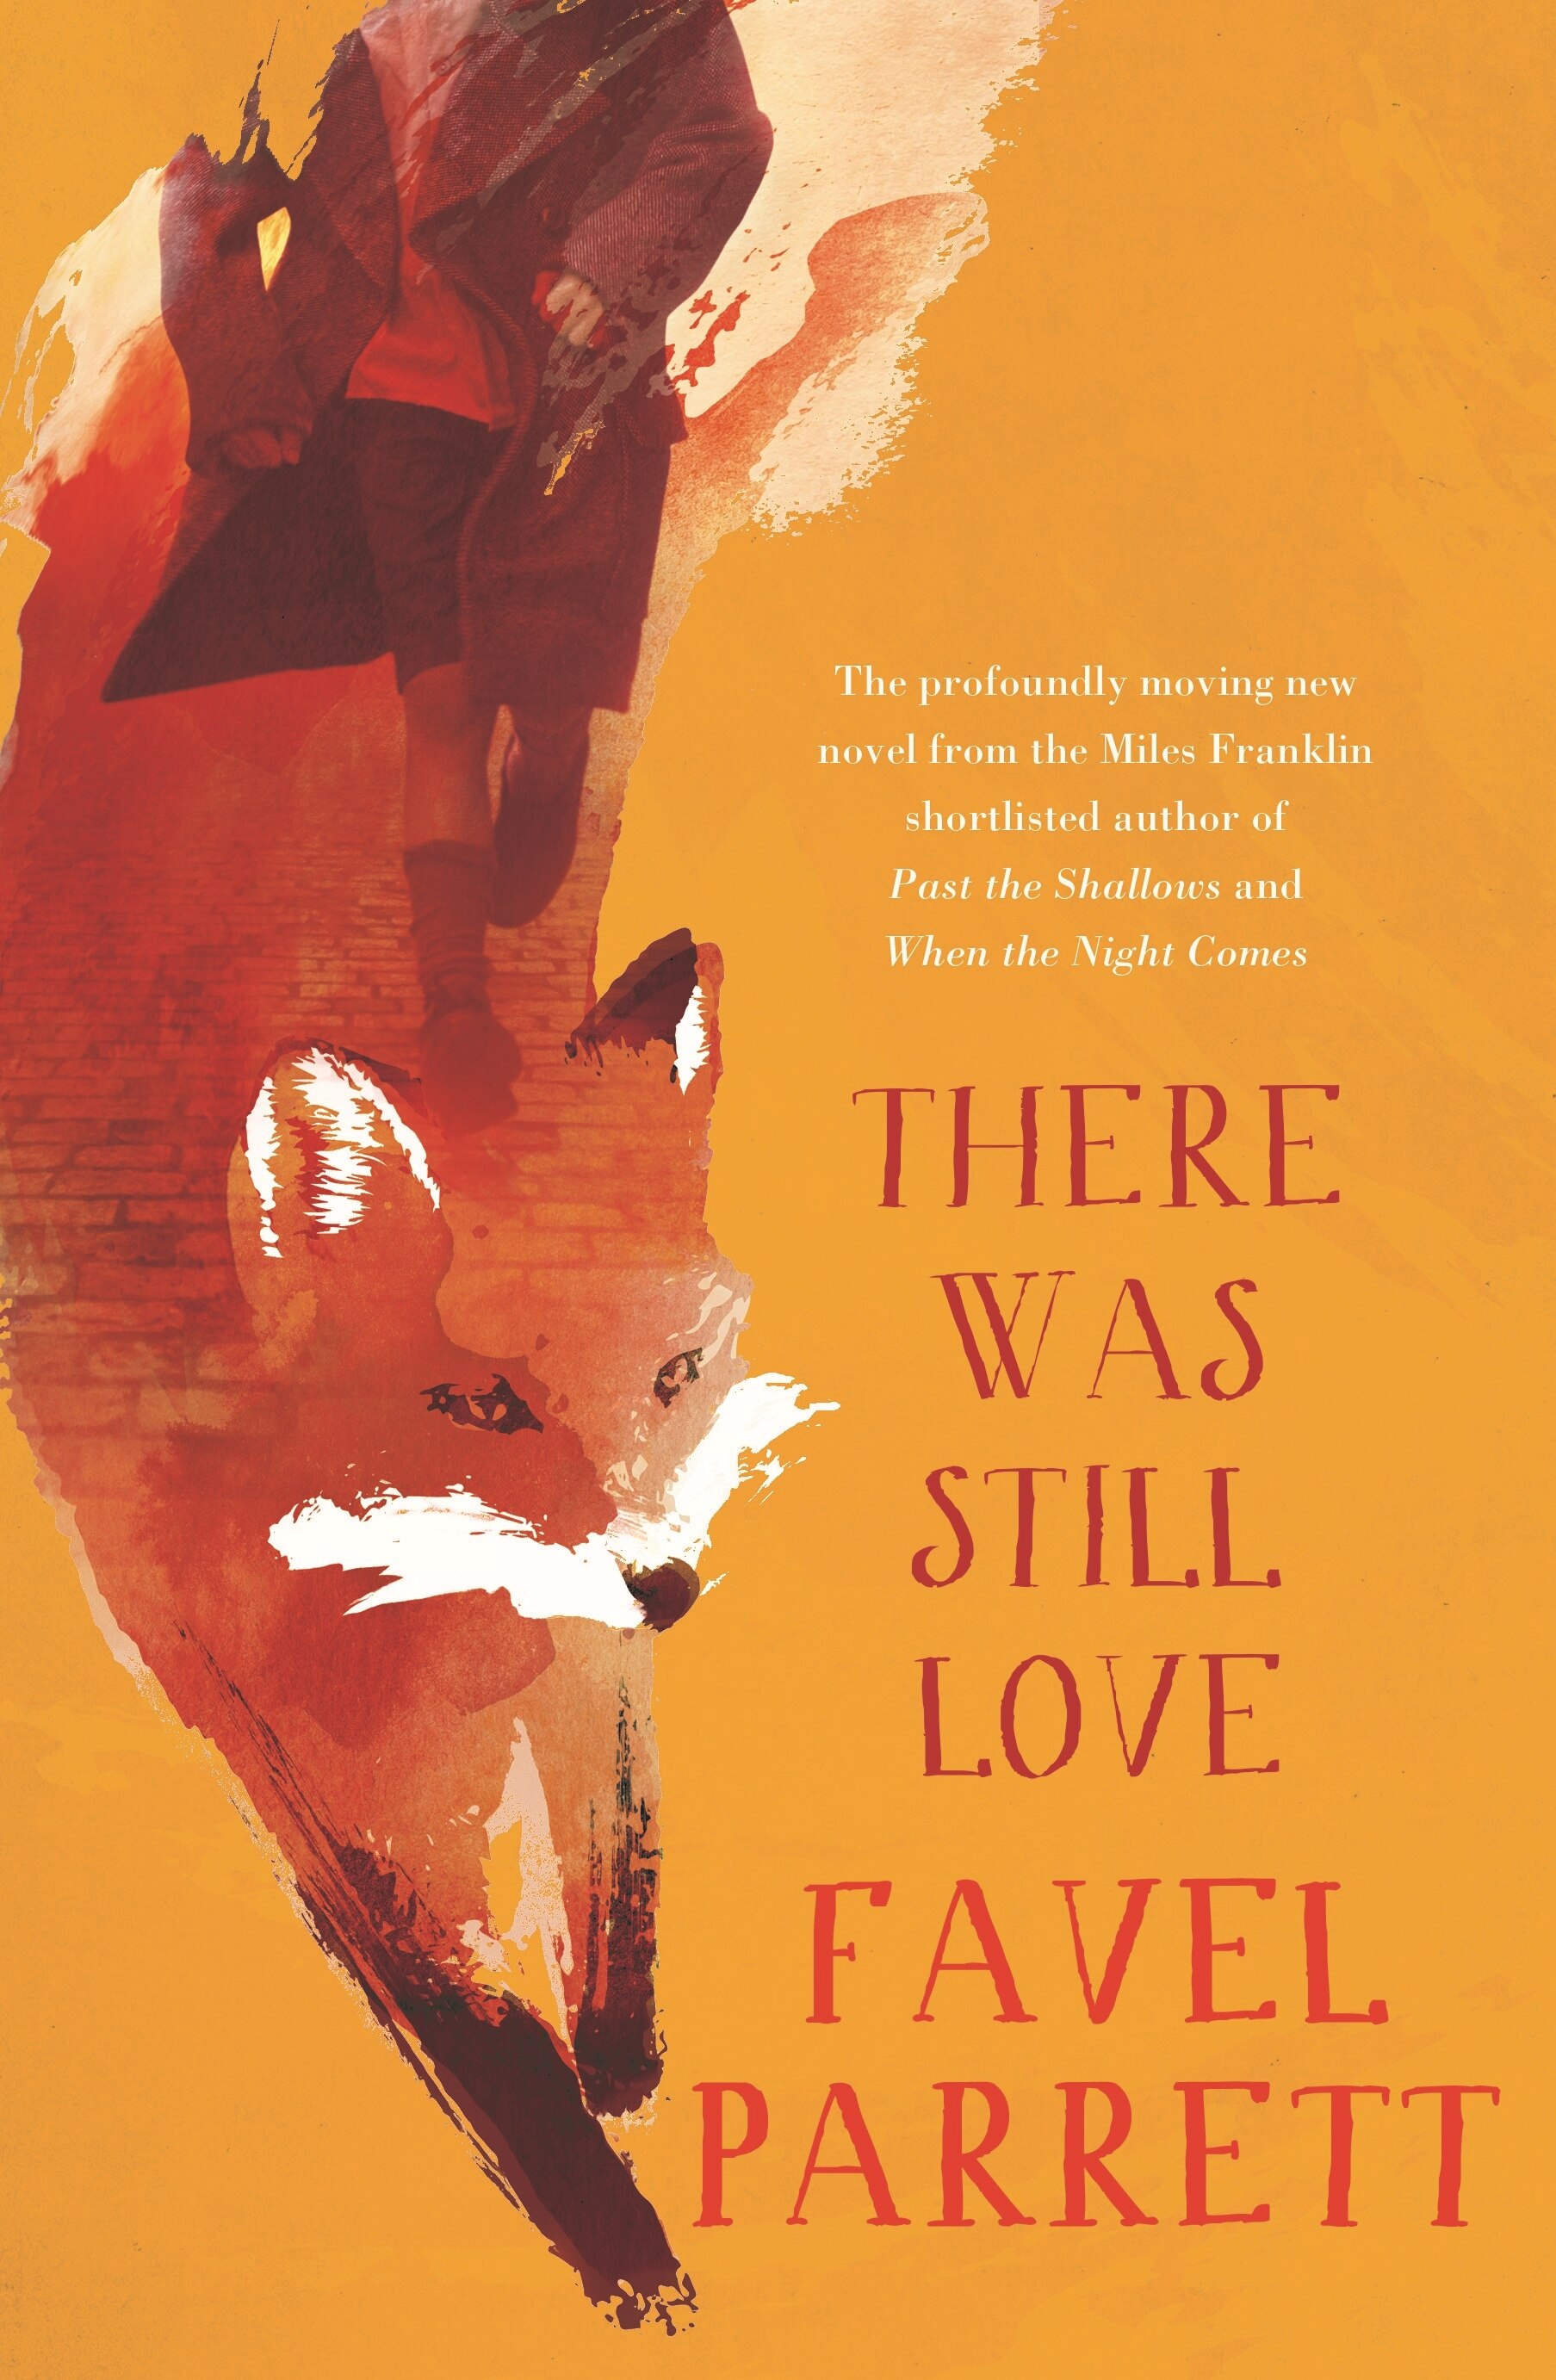 There Was Still Love by Favel Parrett book cover featuring an illustration of a red fox